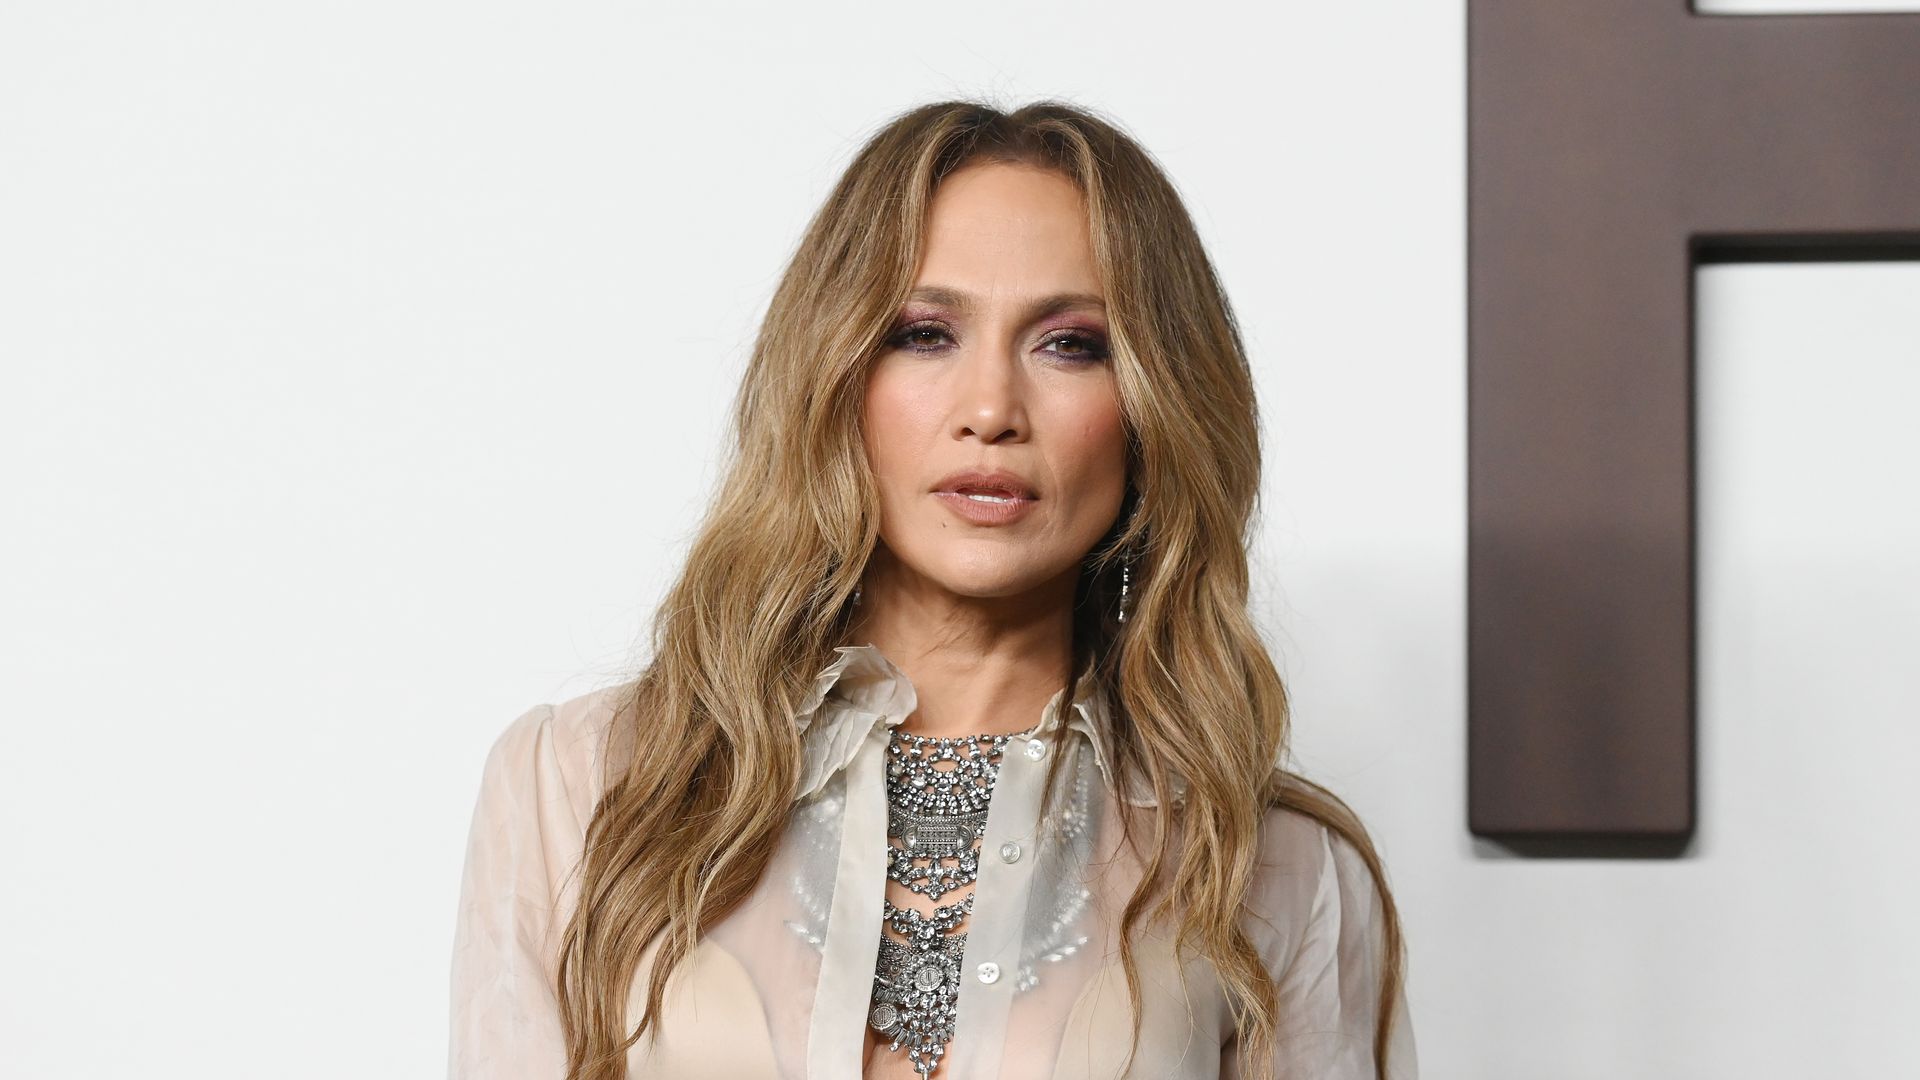 Jennifer Lopez just wore the most baggy jeans of all time